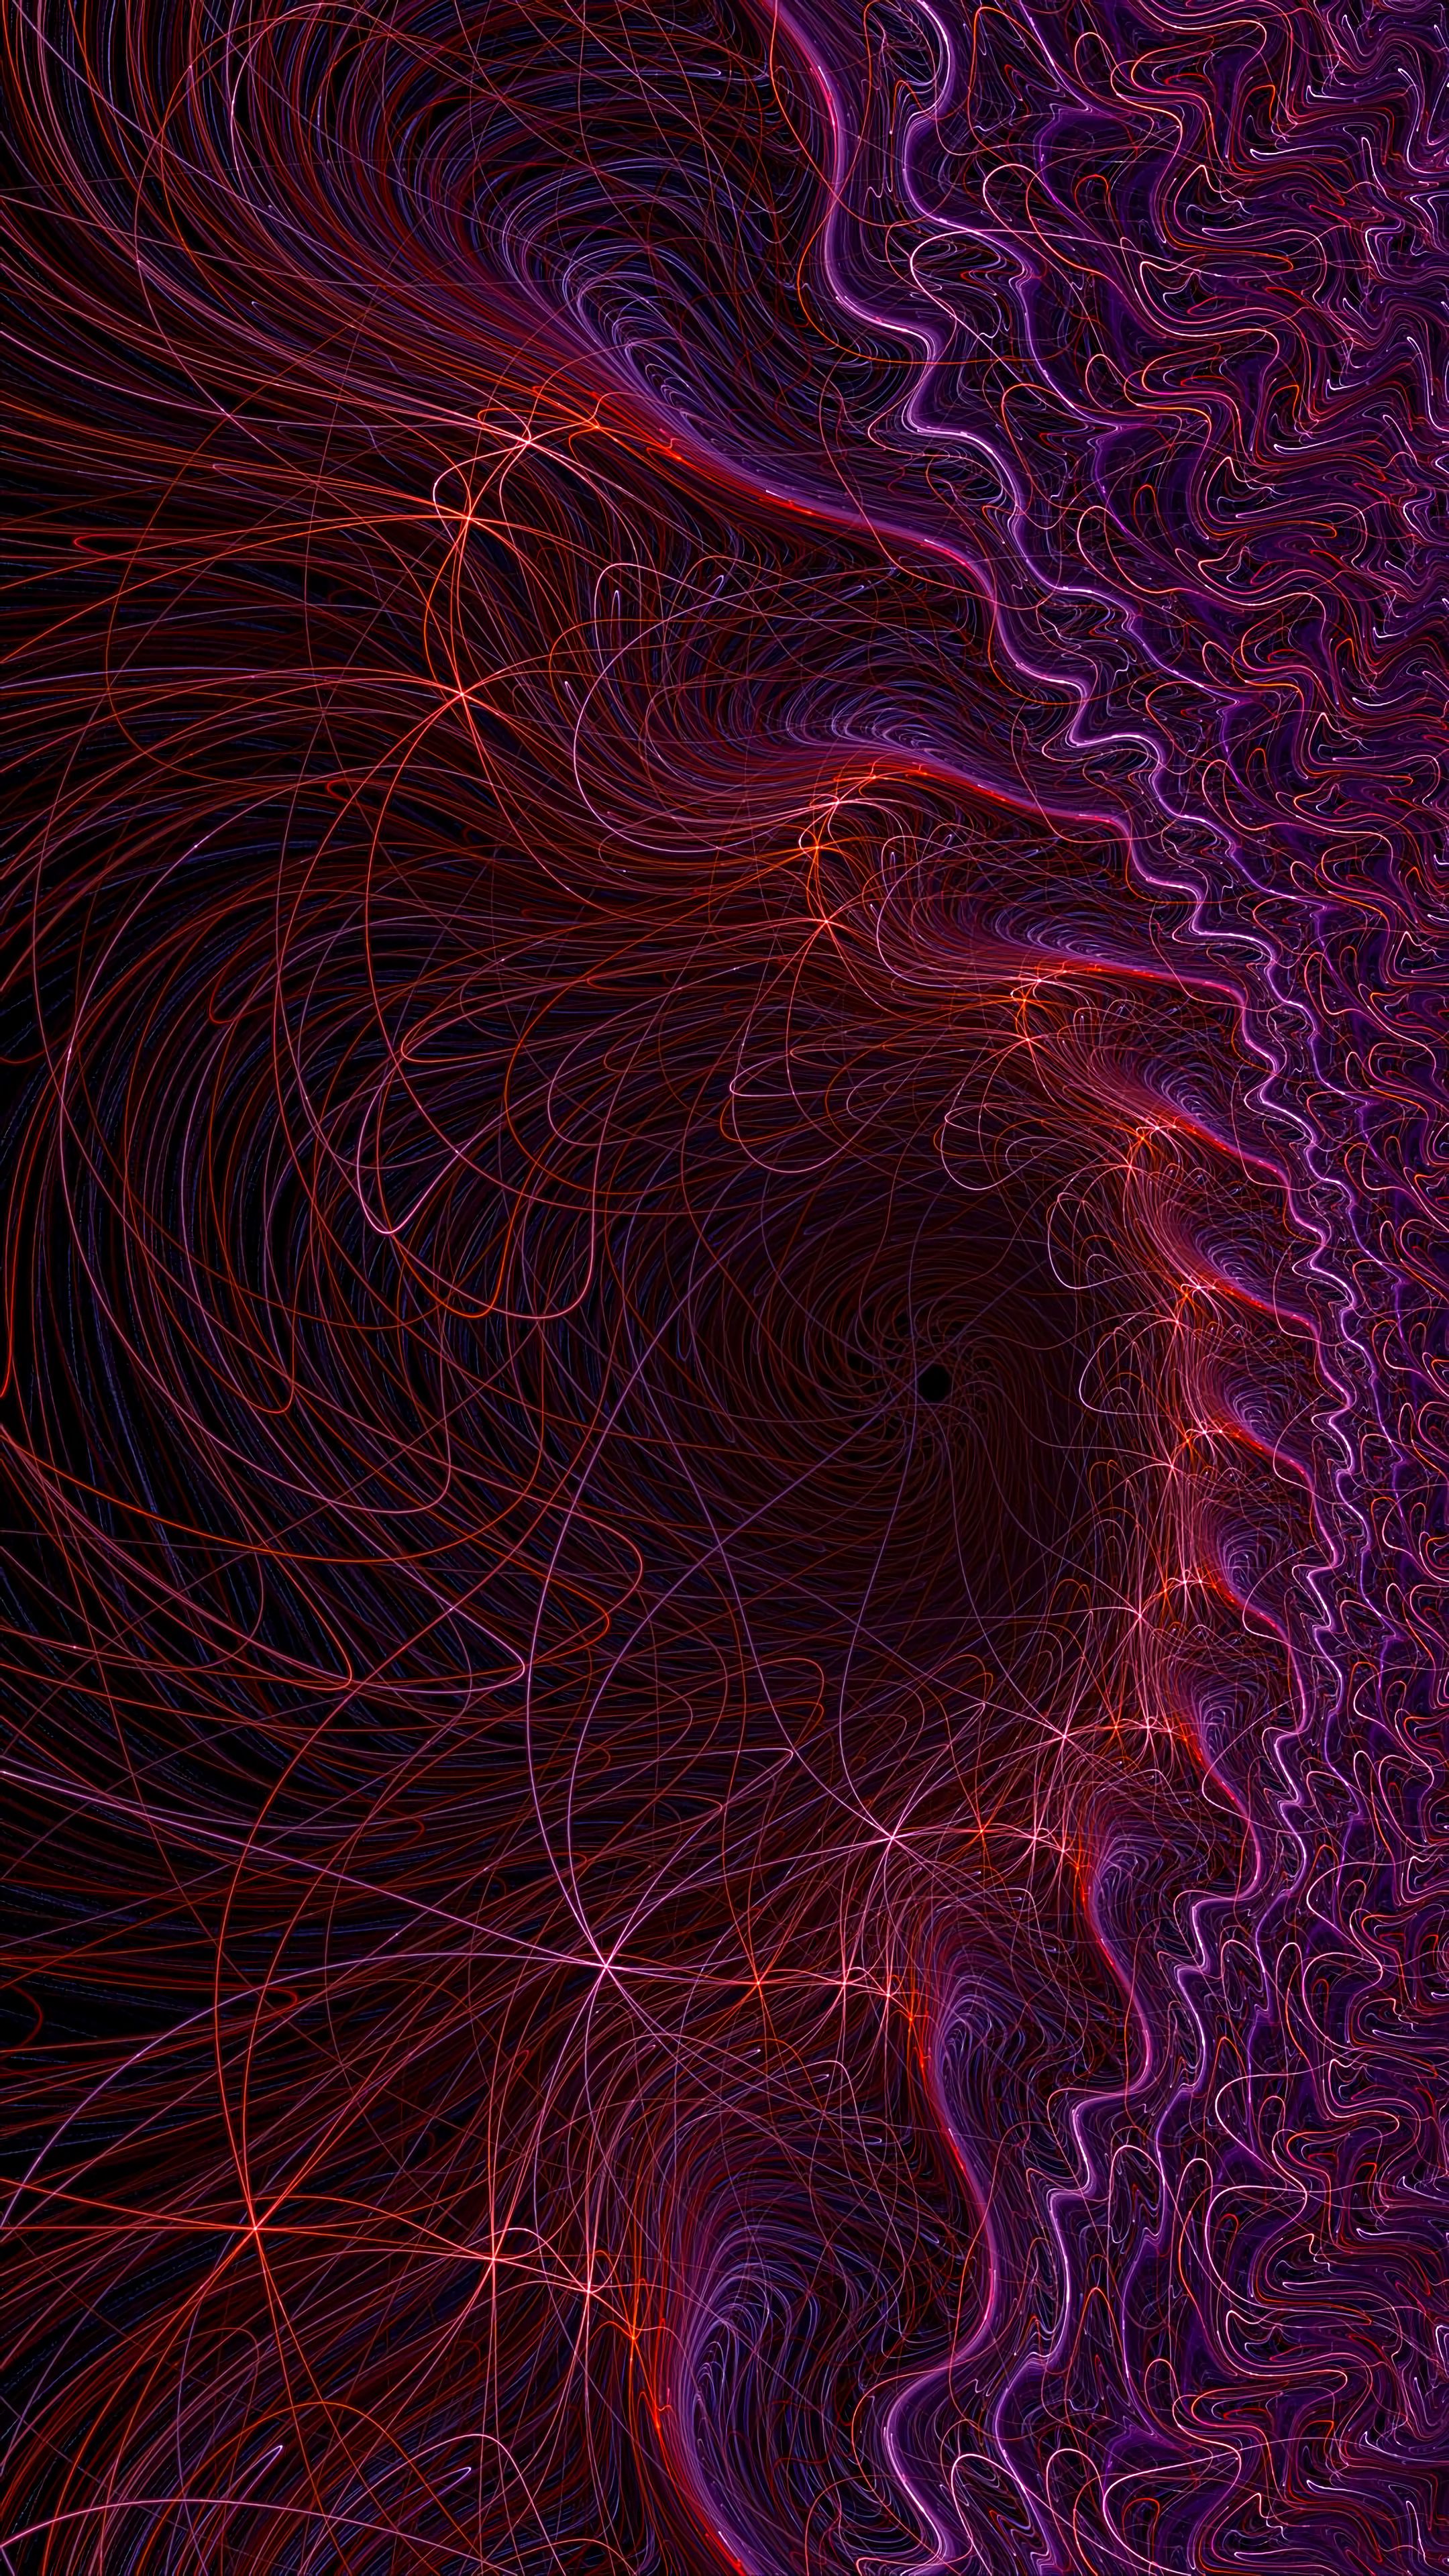 plexus, abstract, lines, fractal, connections, connection, deepening, recess